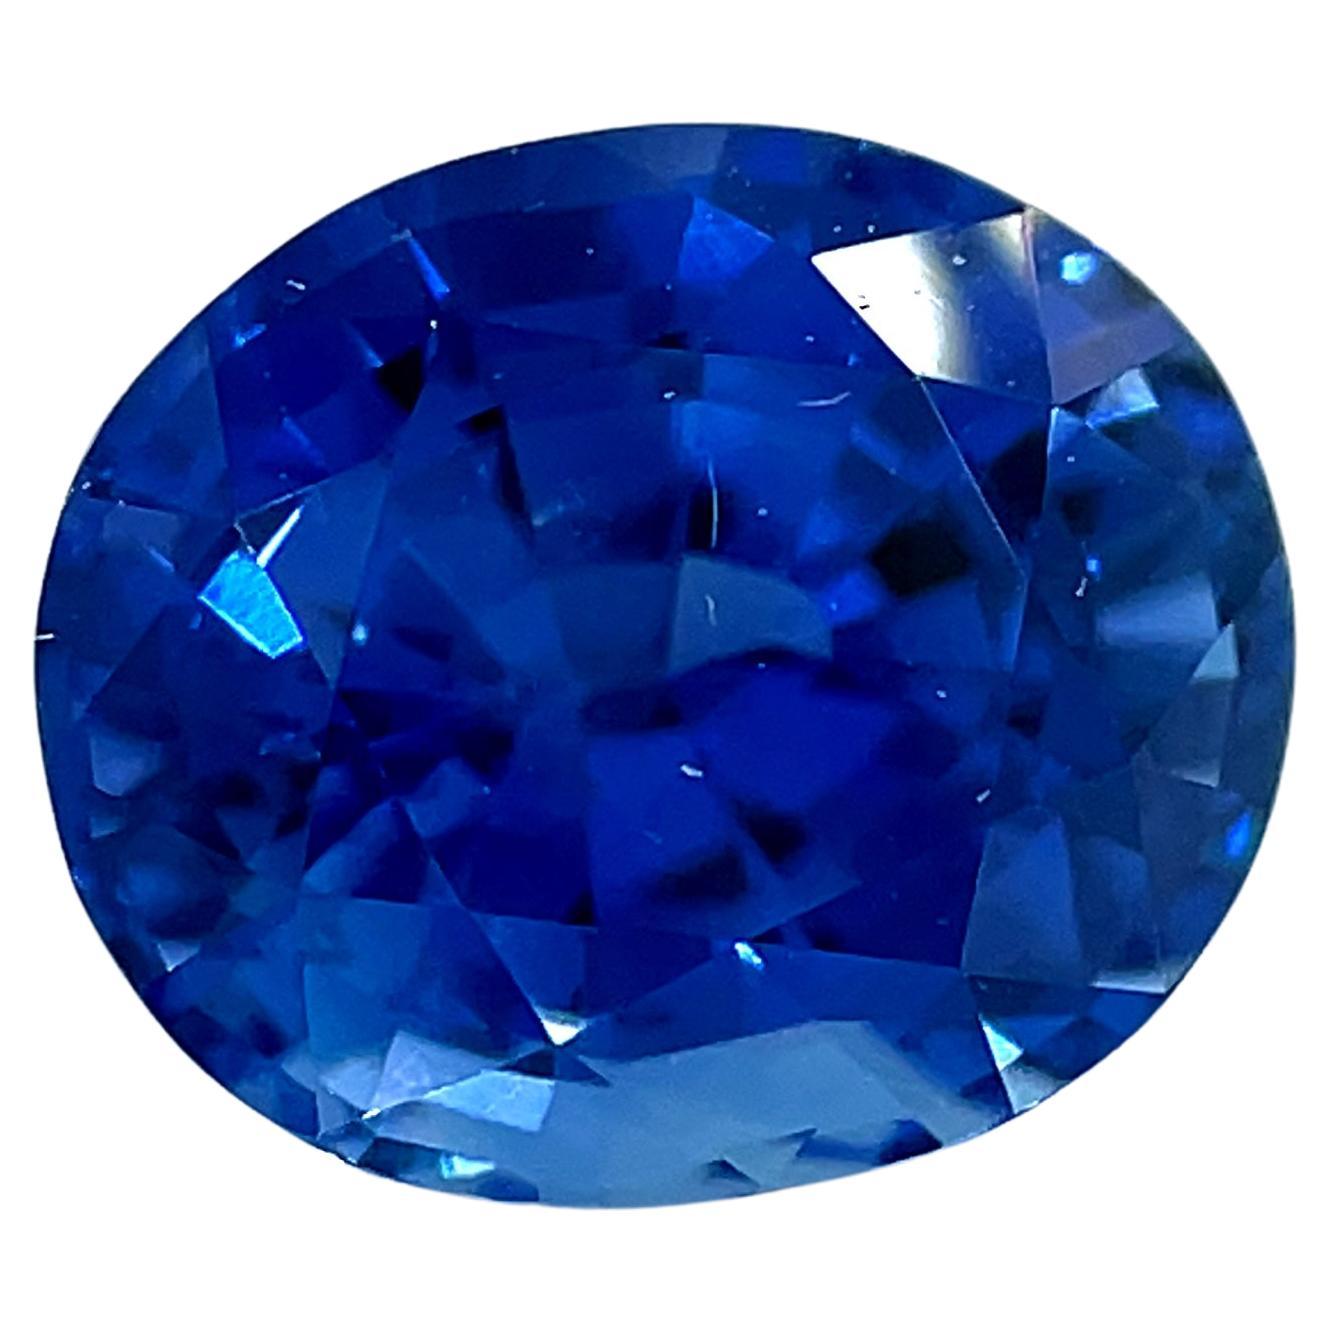 Details about   Natural Loose Gemstone 8 to 10 cts Blue Sapphire Certified Pairs Best Offer R29 